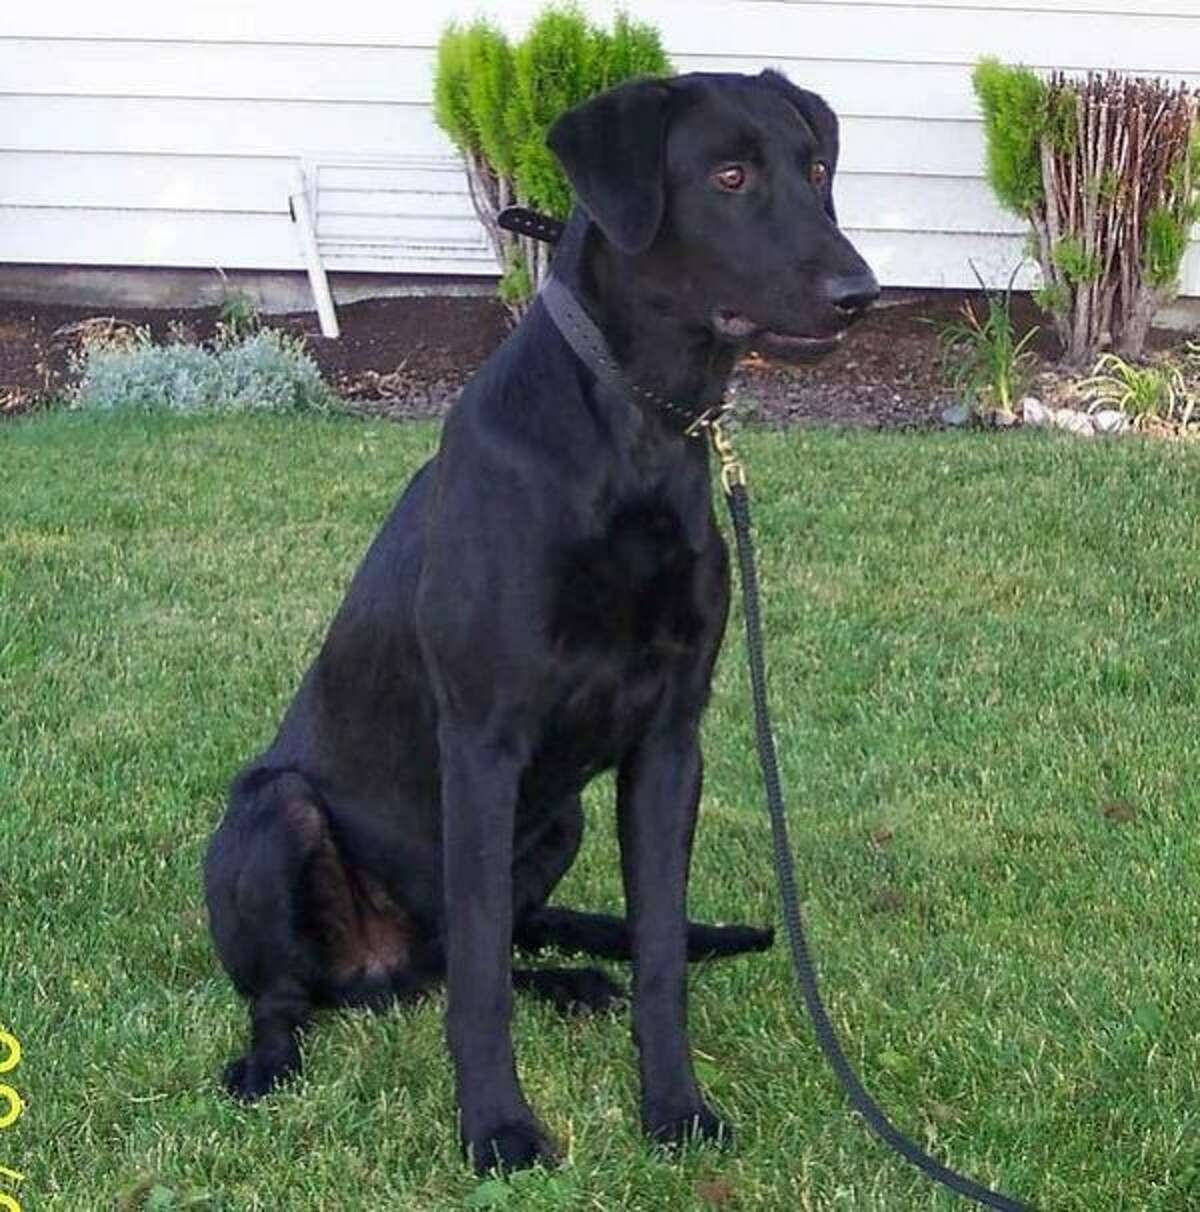 Trax, a Richmond police officer's Labrador retriever that was fatally poisoned at the officer's home March 1, 2013.